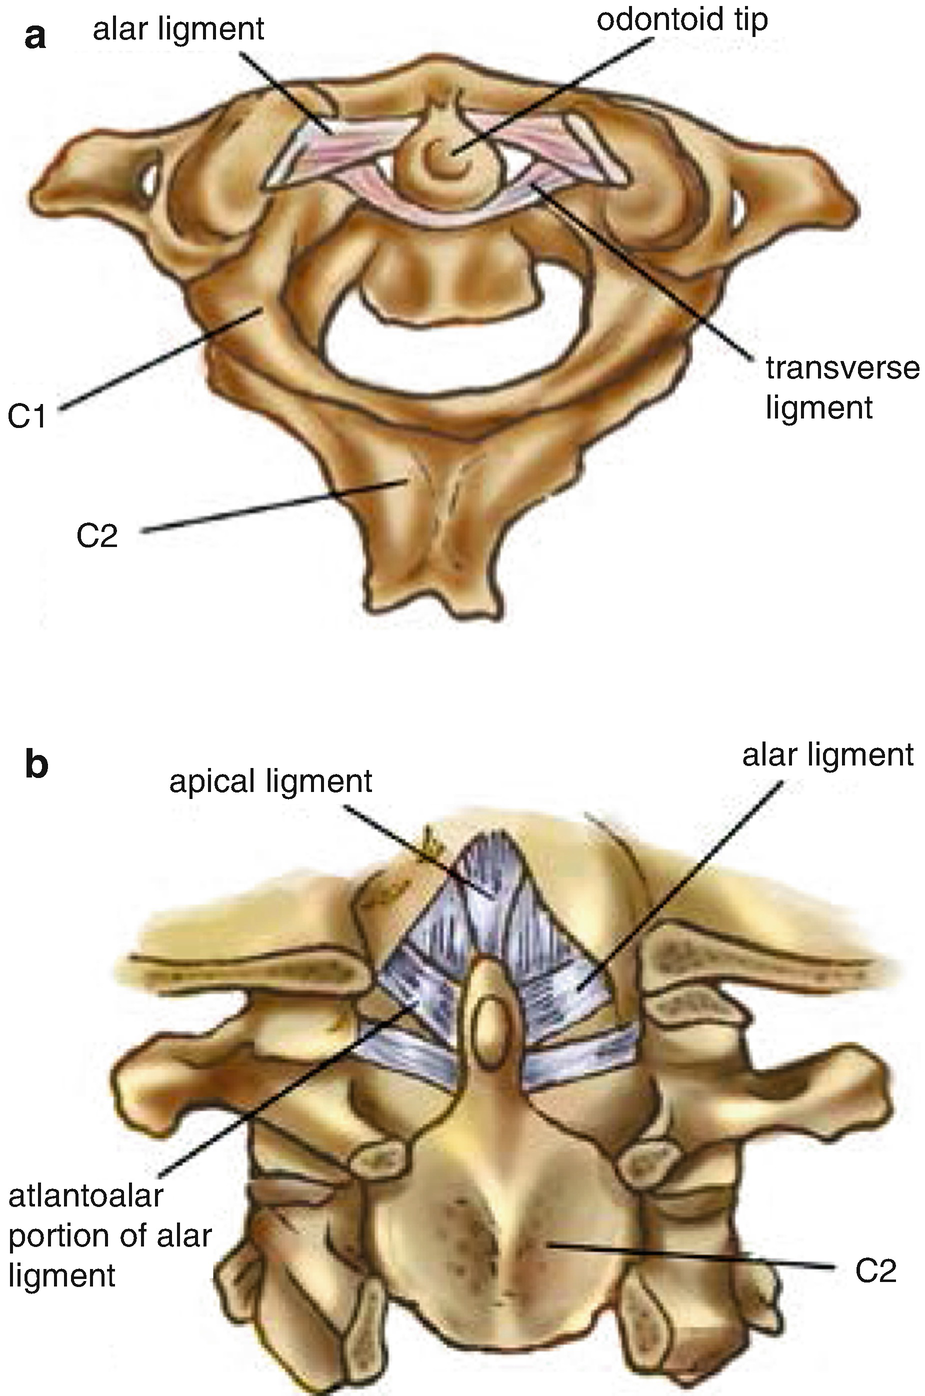 atlantoaxial joint